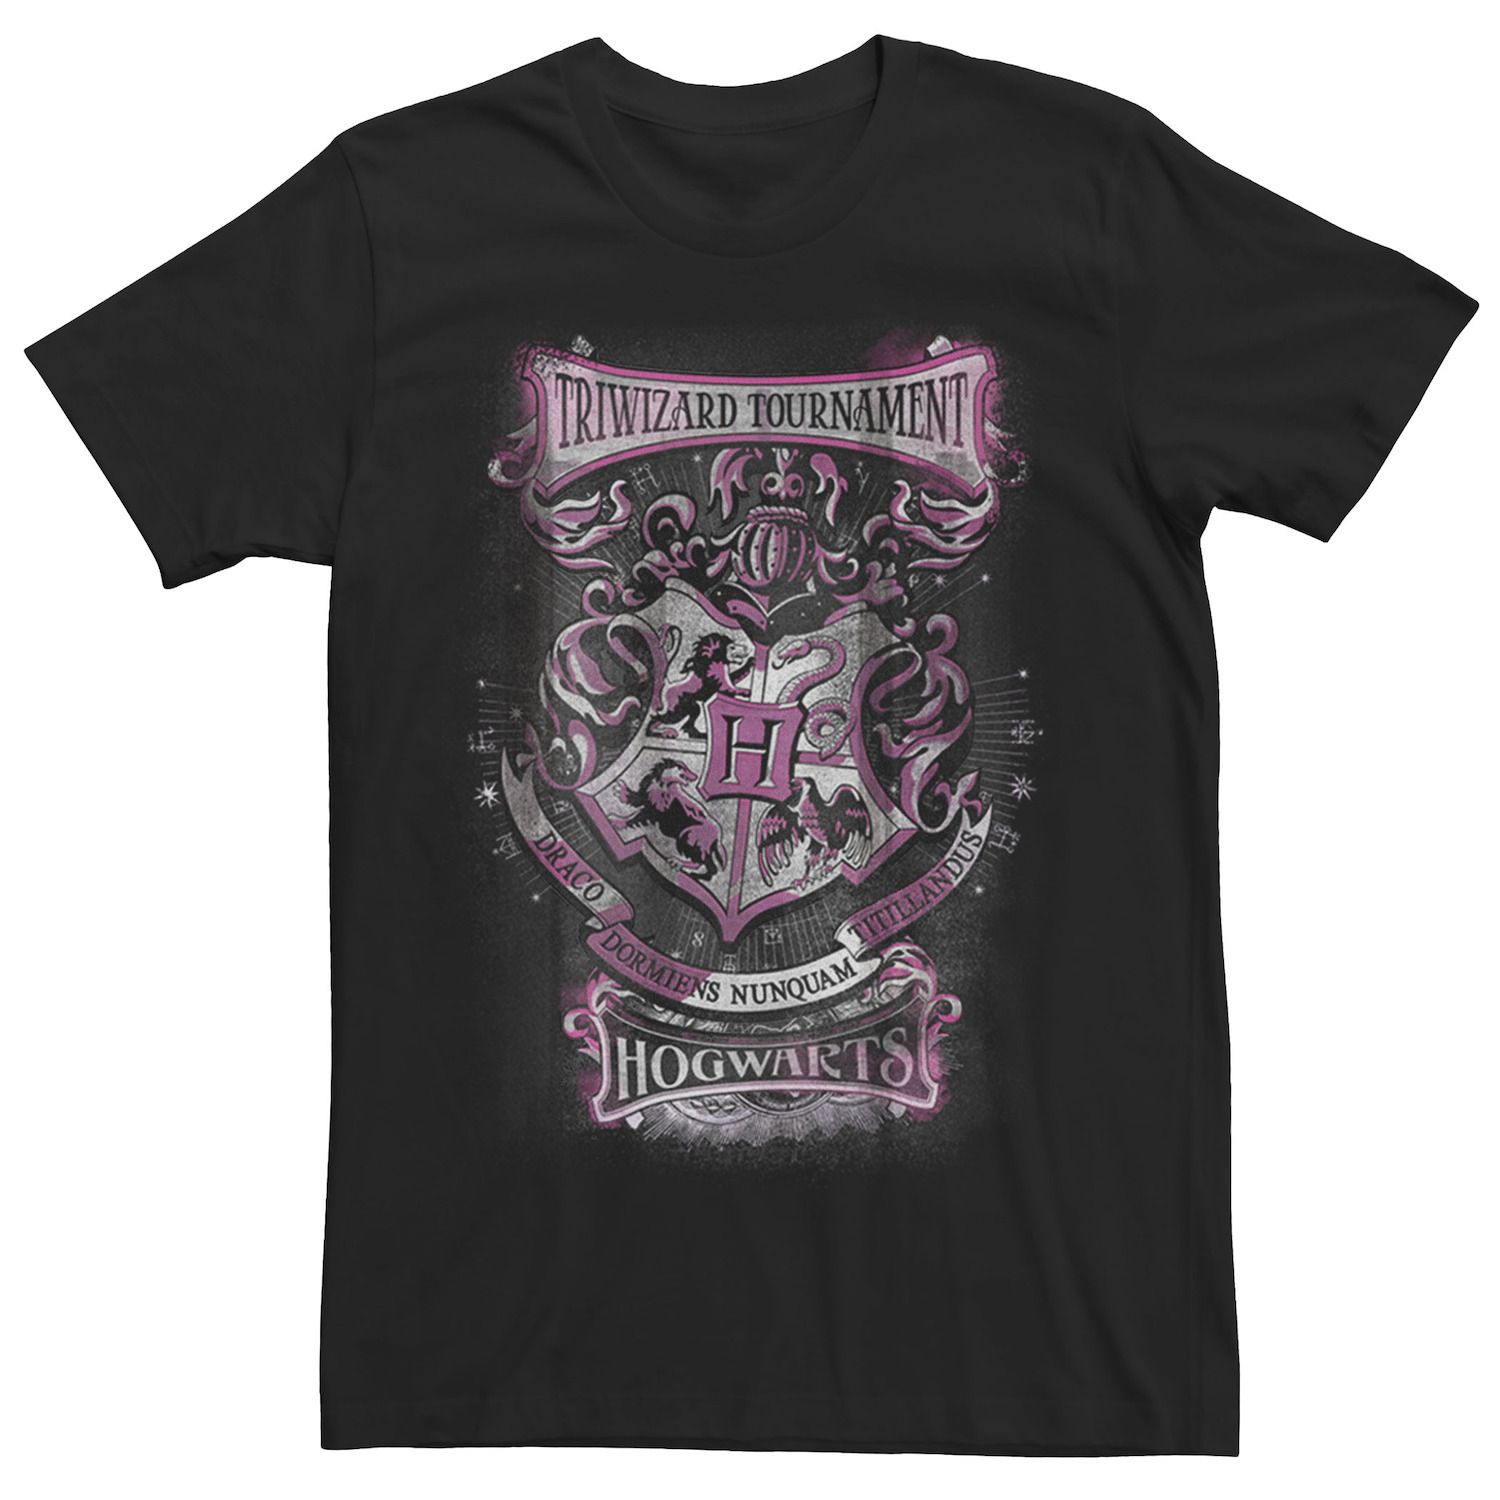 Image for Harry Potter Men's Triwizard Tournament Hogwarts Poster Graphic Tee at Kohl's.